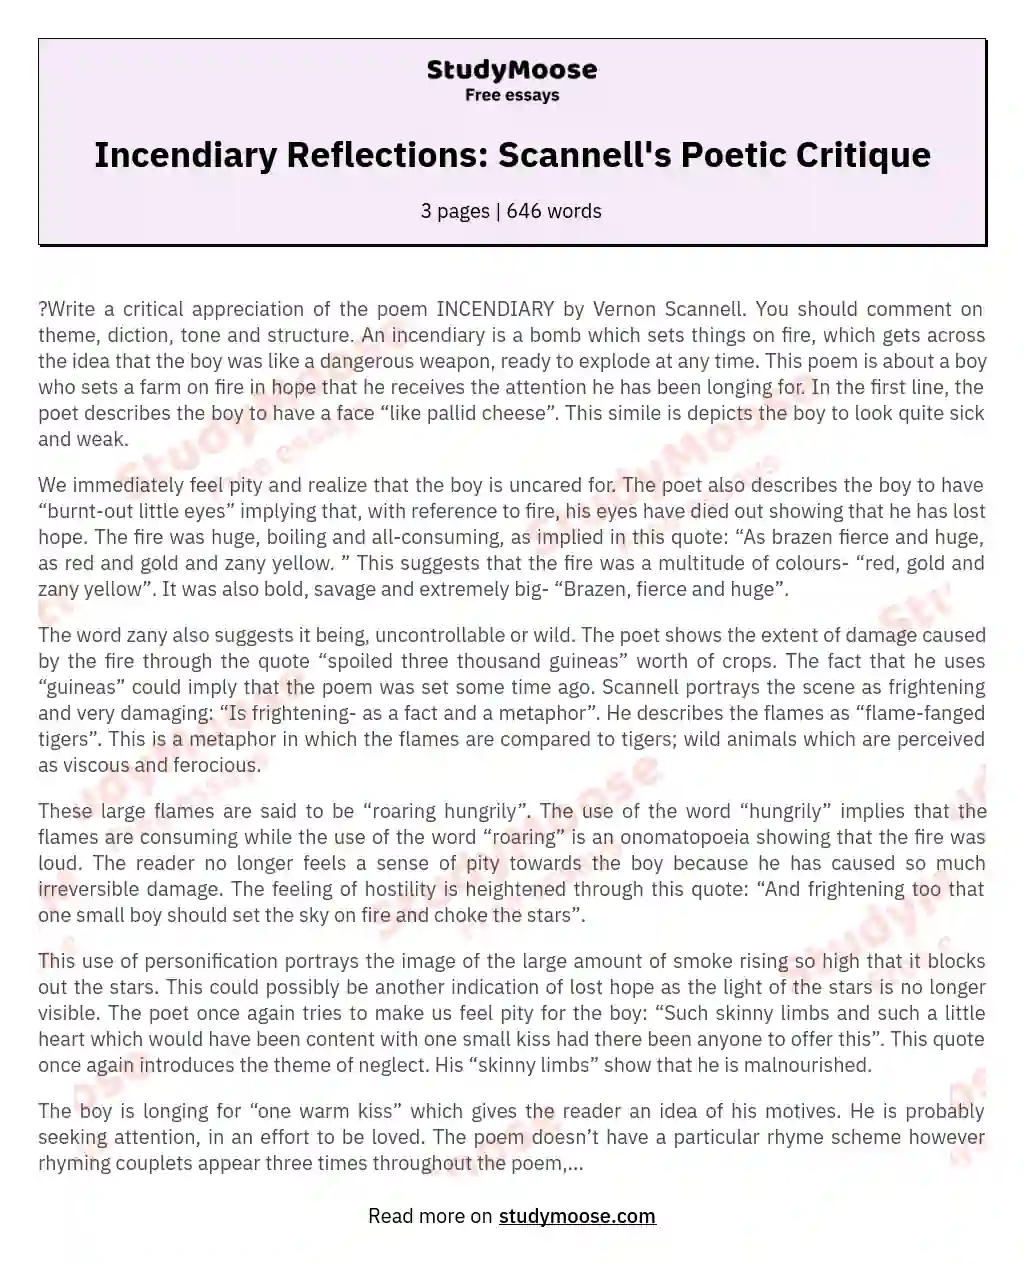 Incendiary Reflections: Scannell's Poetic Critique essay